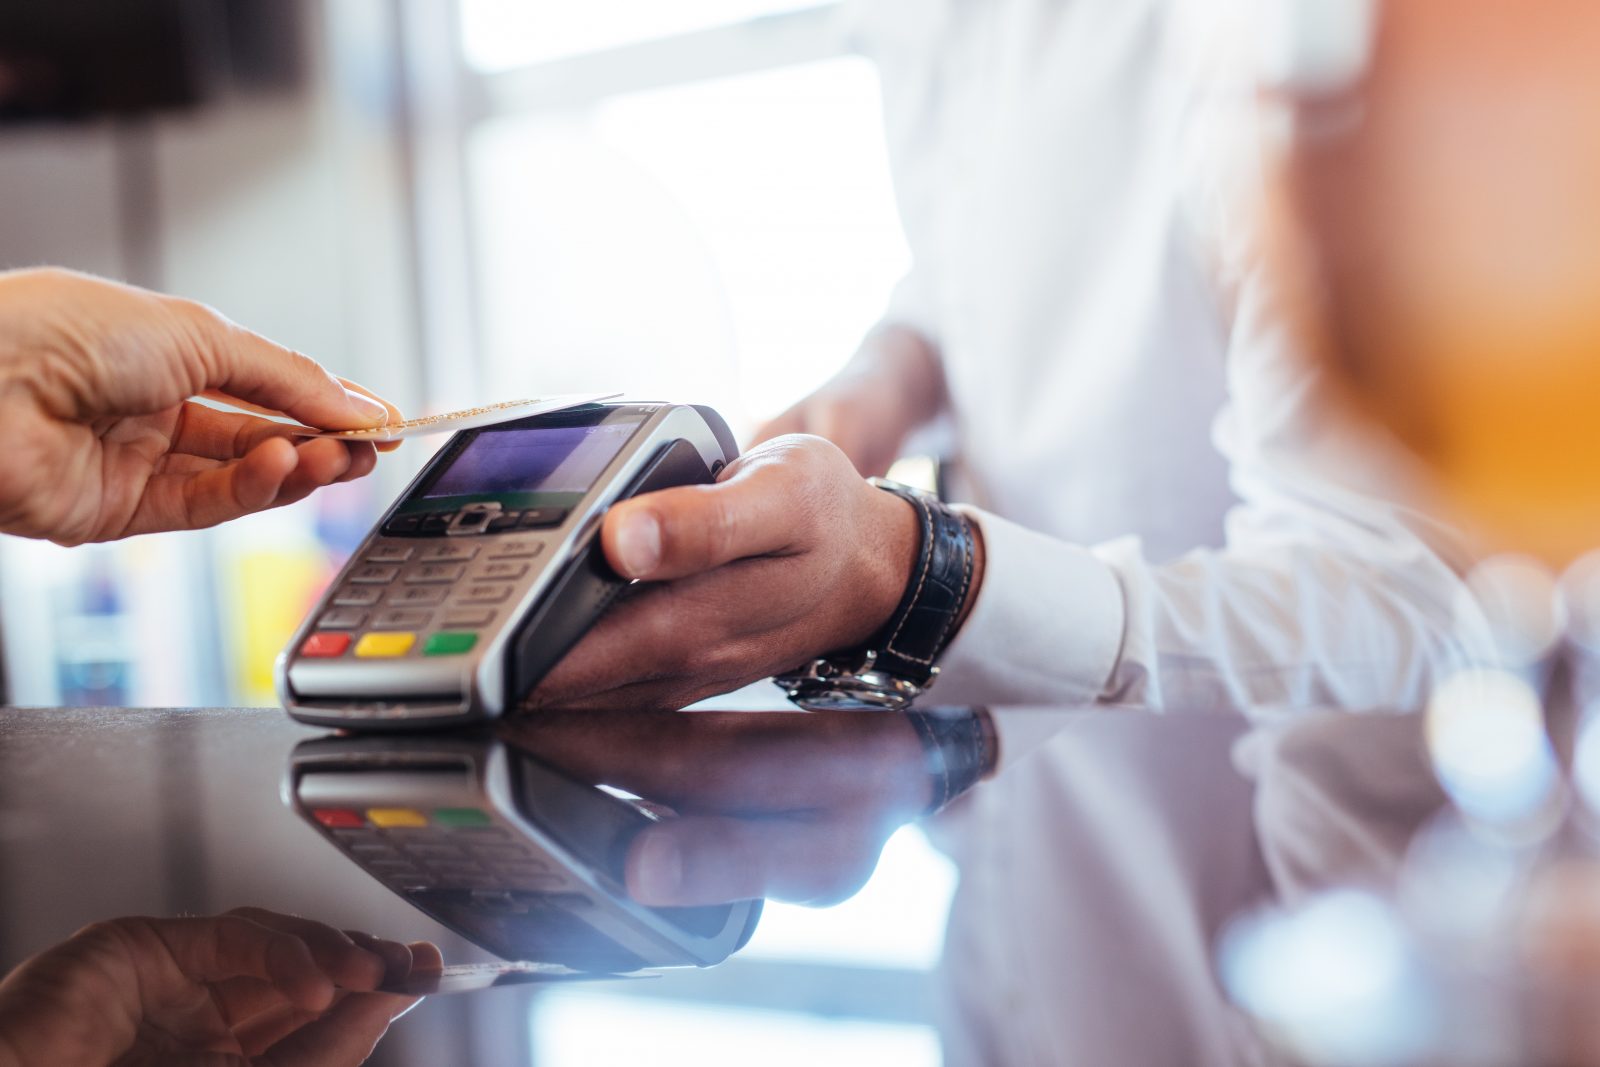 A customer making a payment with a card at a terminal to the merchant’s merchant account.